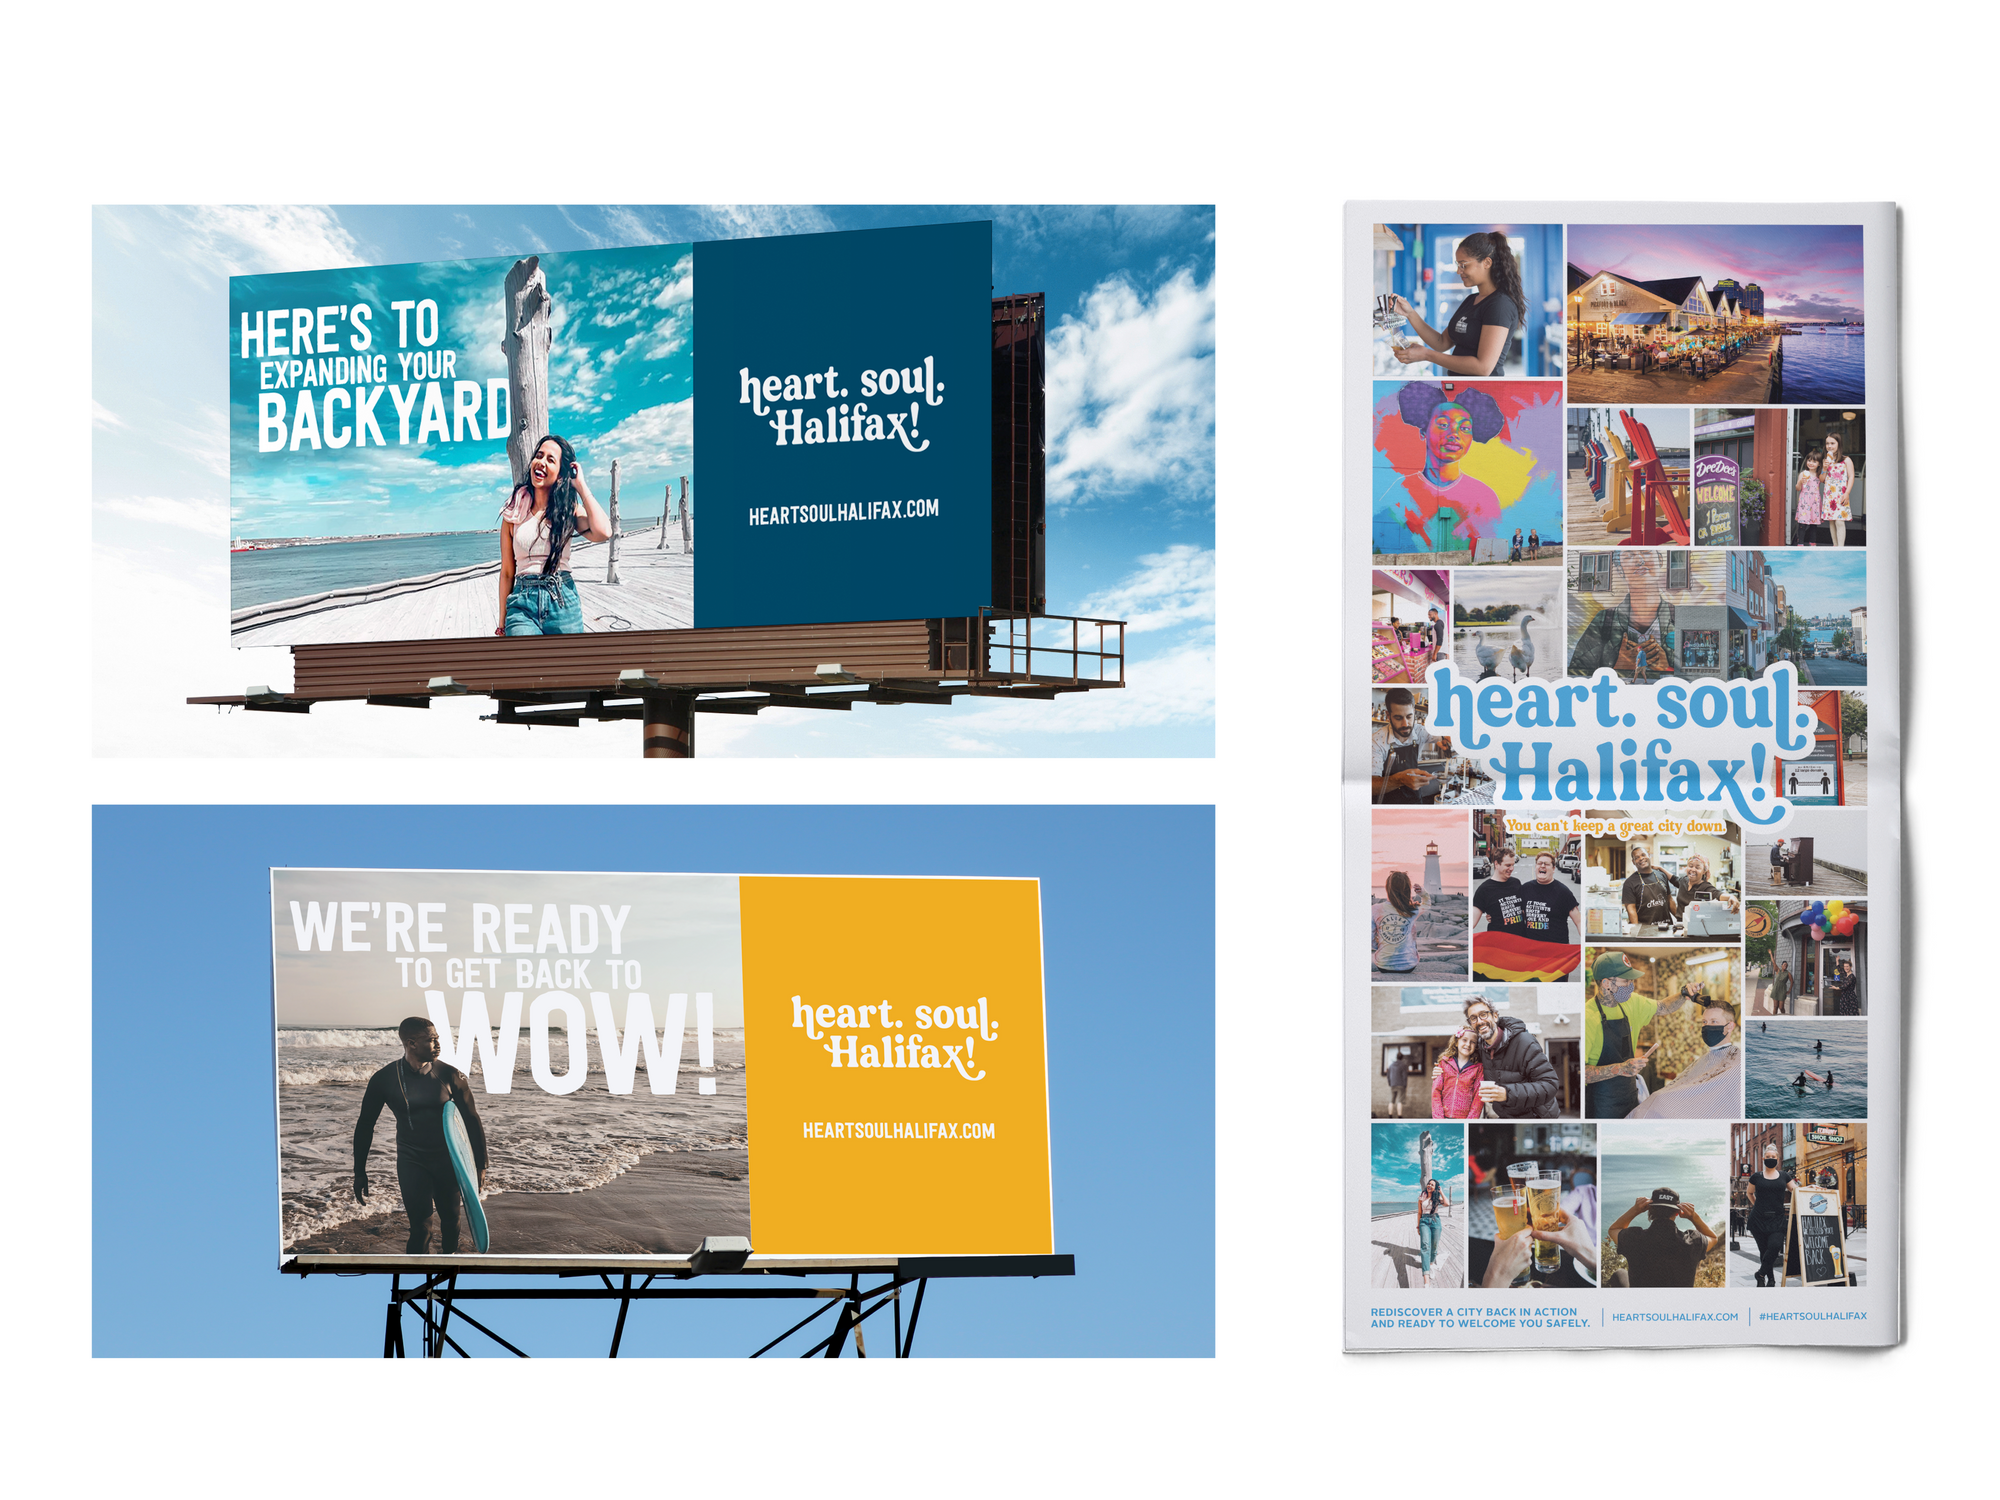 Discover Halifax's 'heart. soul. Halifax!' campaign billboards (2) and full page newspaper ad in The Coast. NS imagery